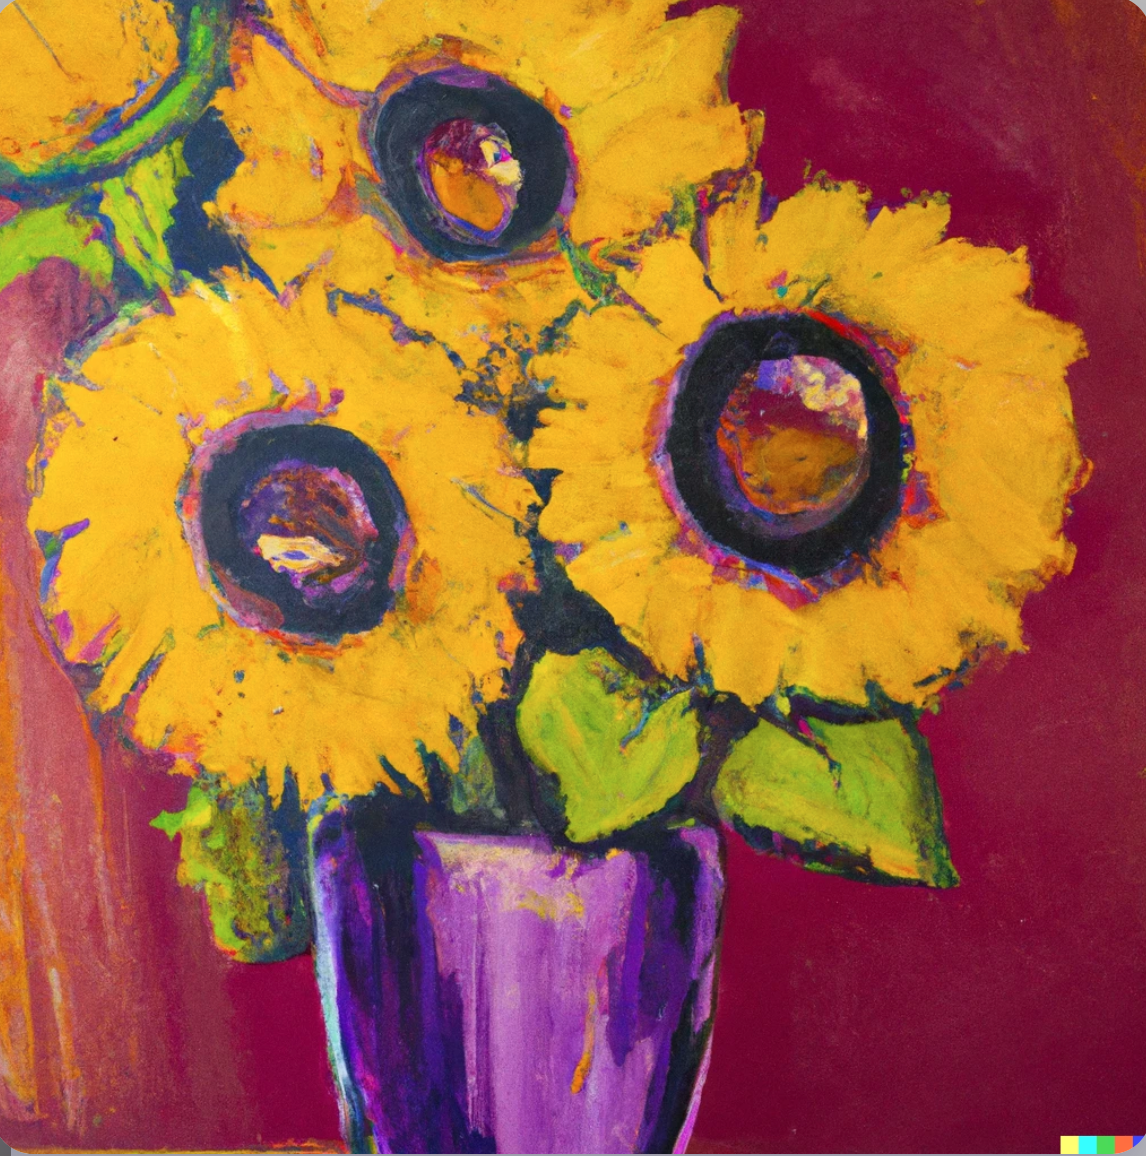 Sunflowers in a purple vase